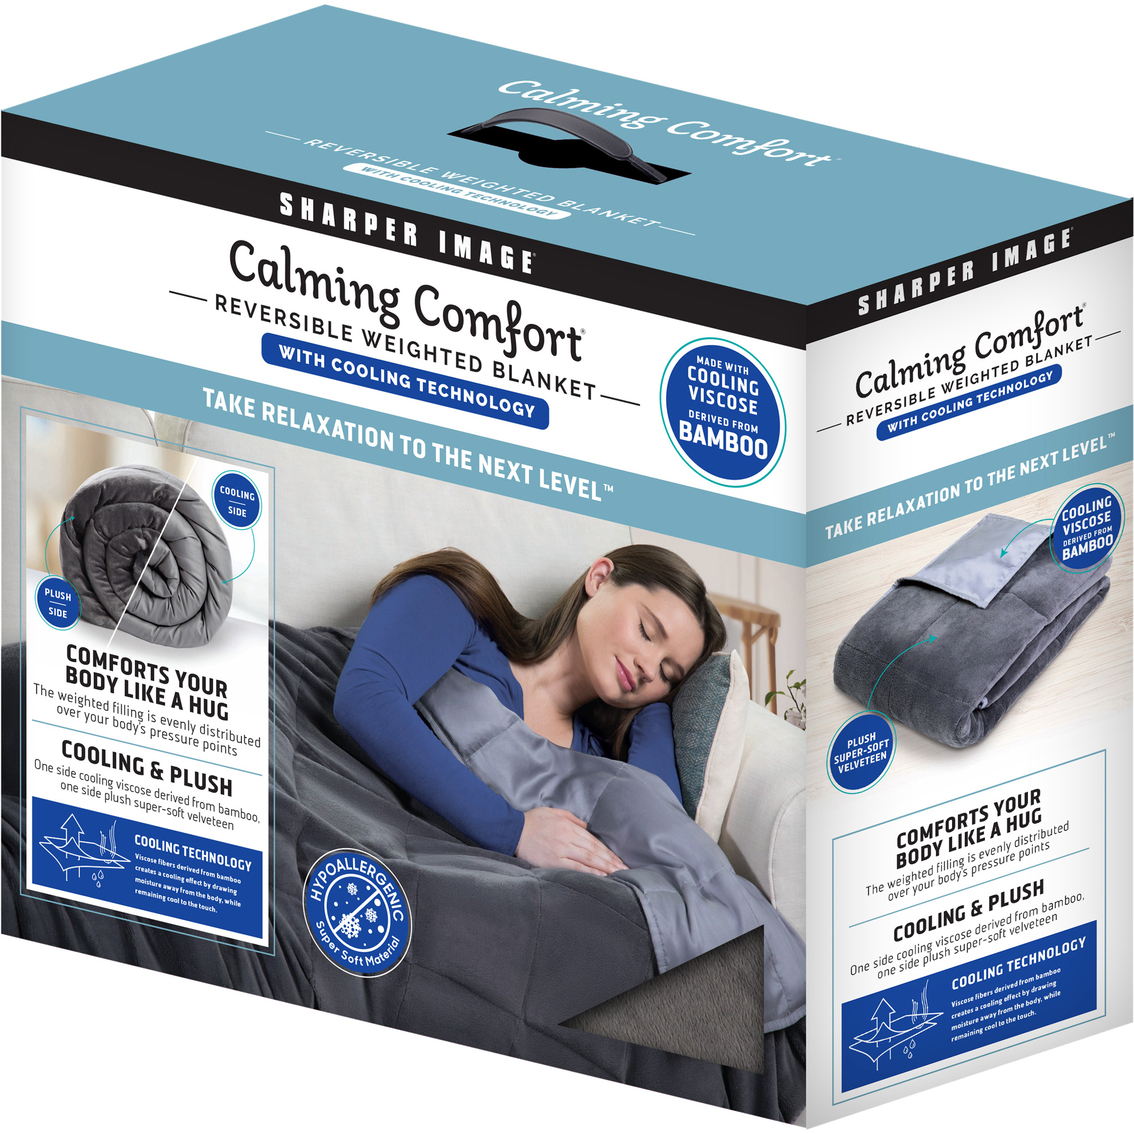 Sharper Image Calming Comfort Reversible Weighted Blanket With Cooling Technology Blankets Bedding Accessories Back To School Shop Shop The Exchange